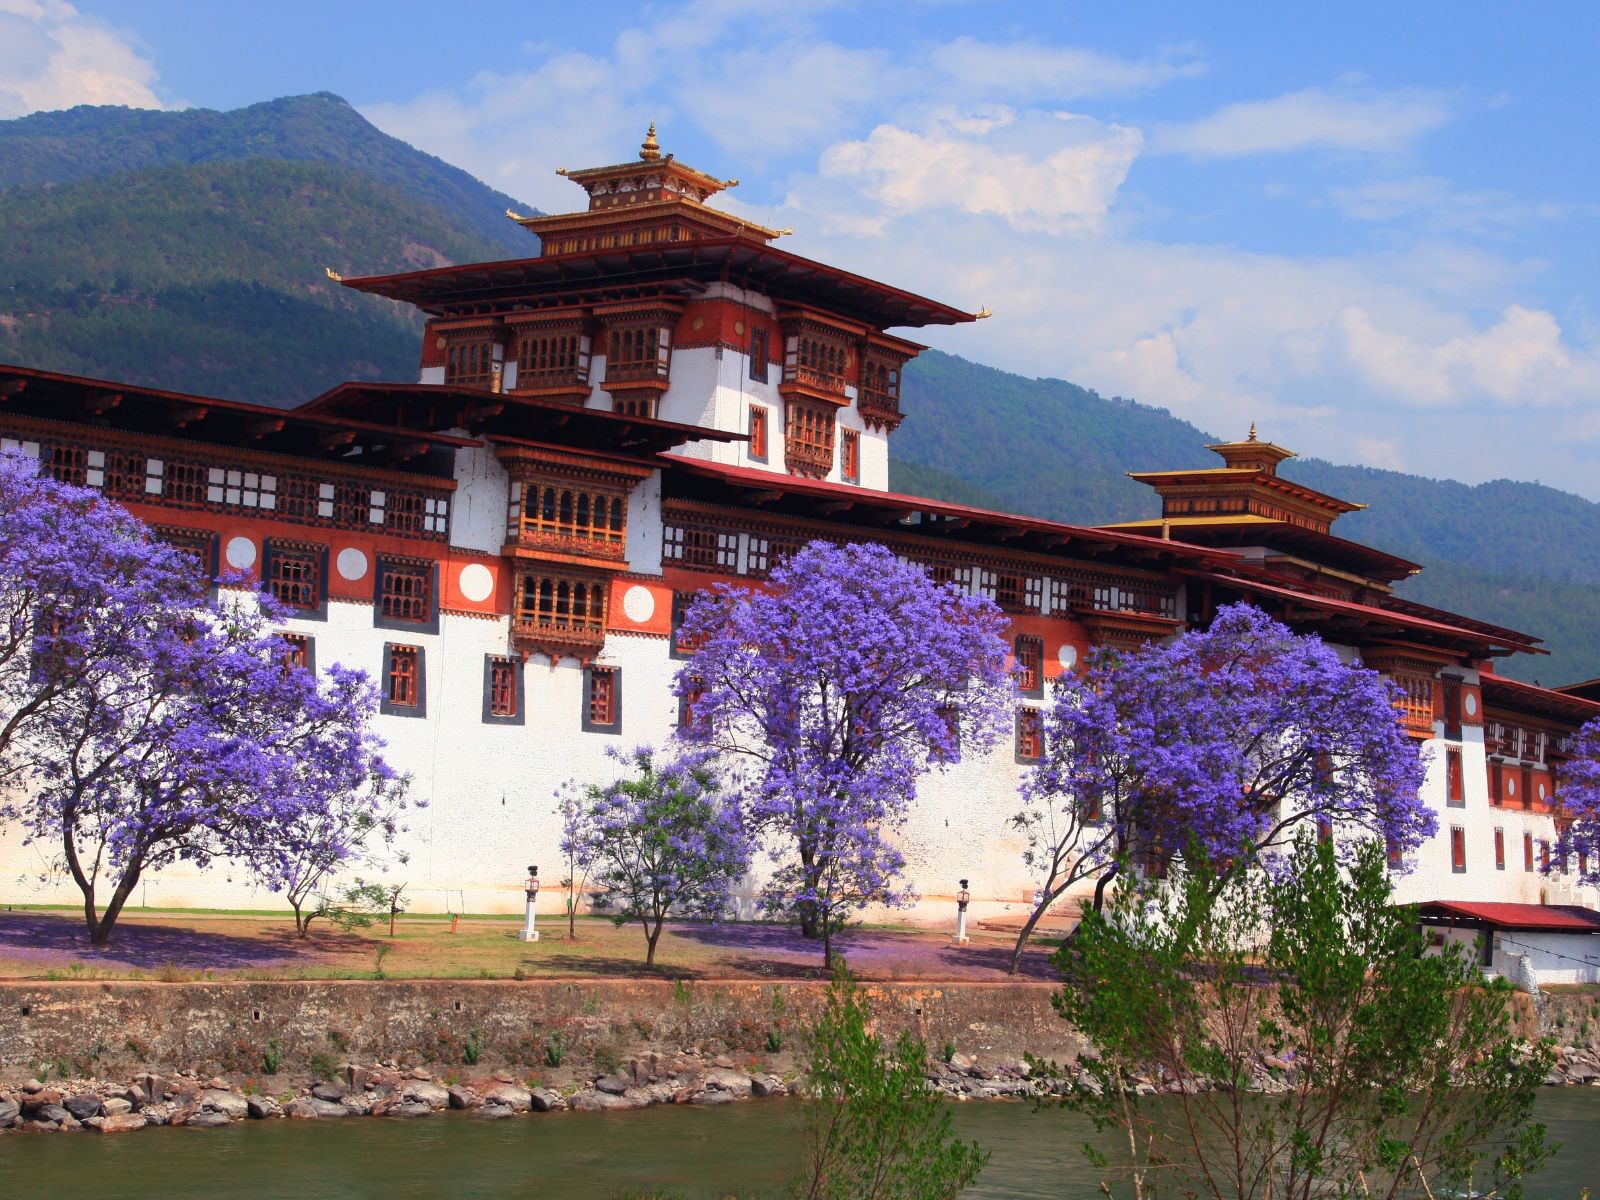 Why now is the time to visit Bhutan.